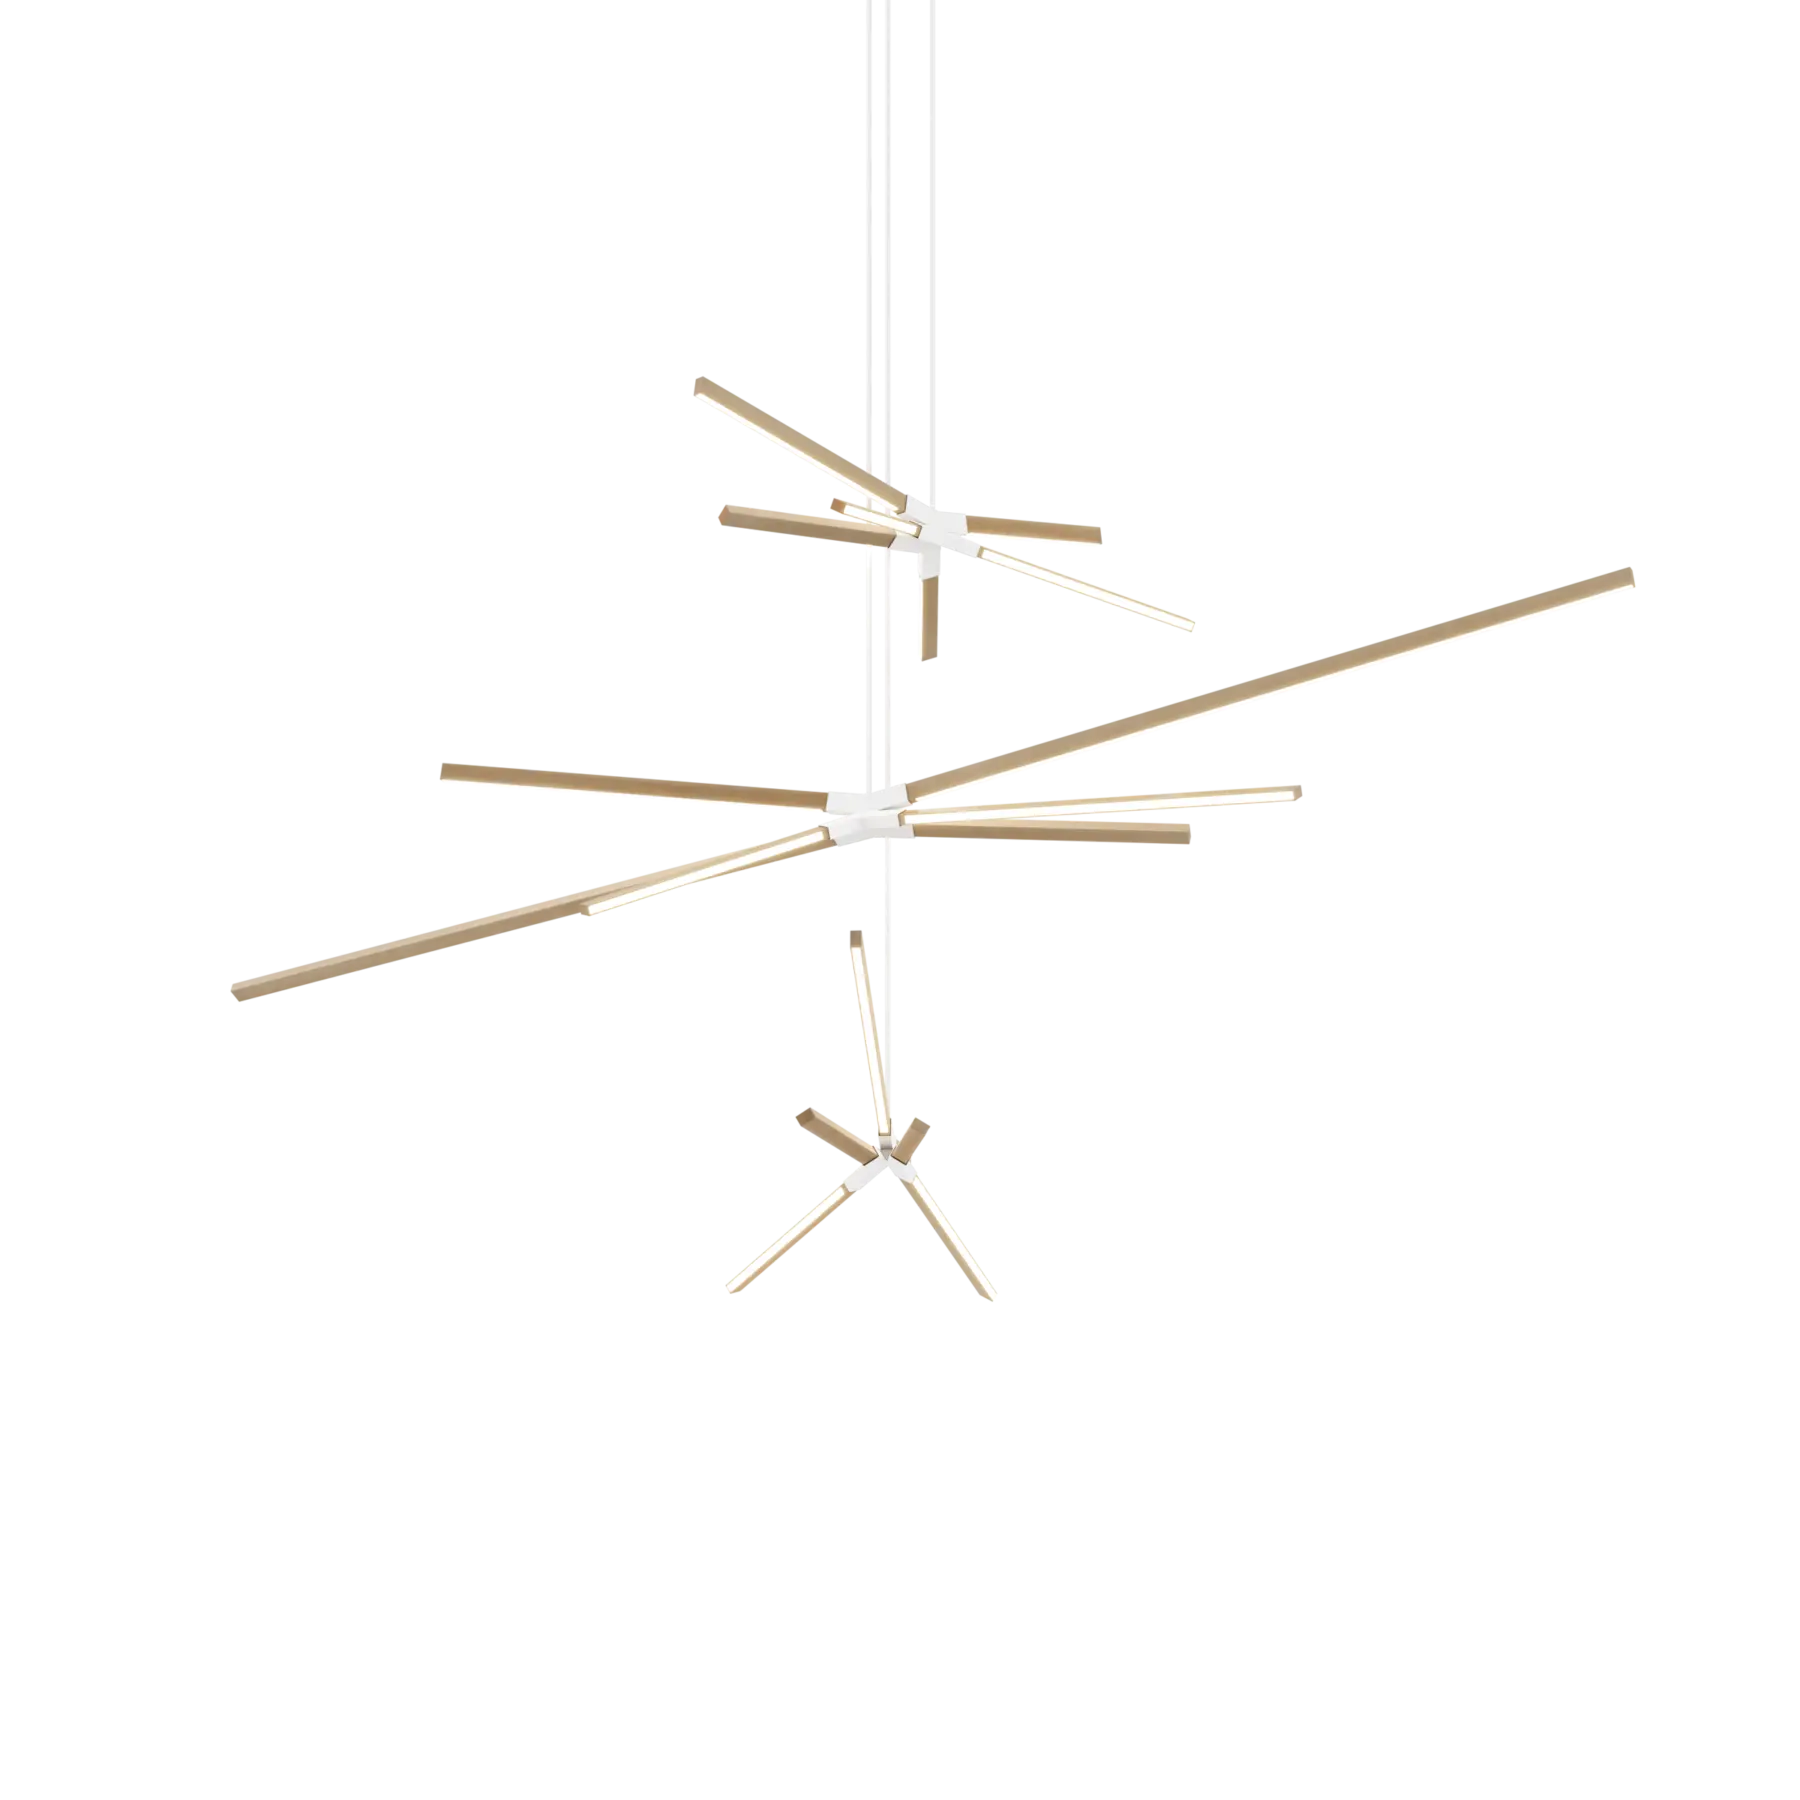 Image of a Stickbulb Multiple Skybang lighting fixture. The modern fixture consists of sleek wooden beams with multiple integrated LED bulbs.